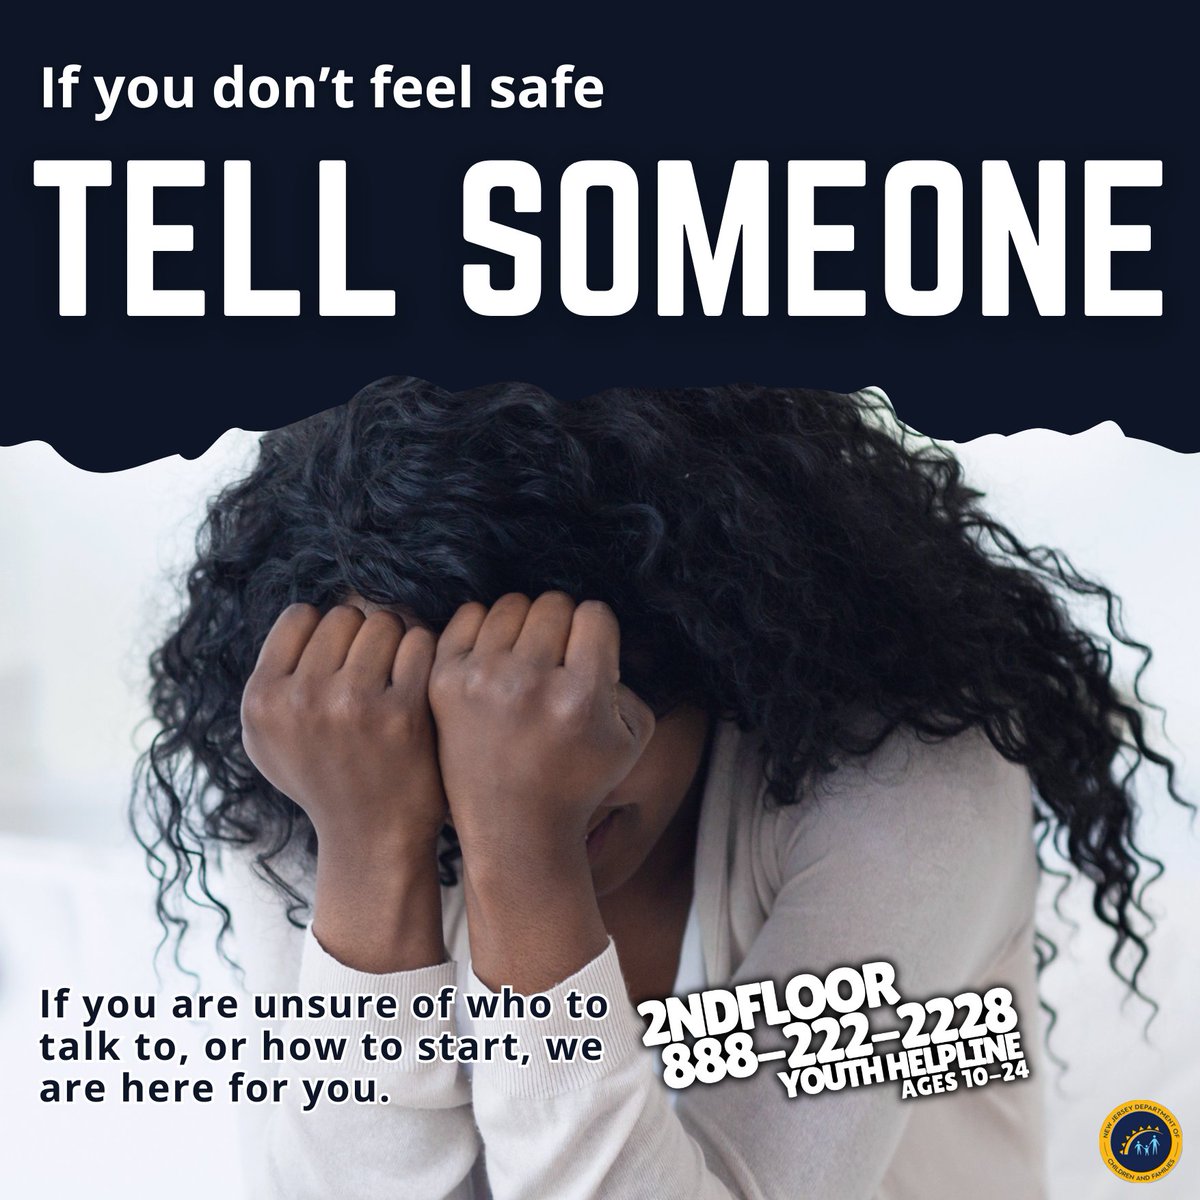 If you feel scared at home, please tell a trusted adult. Everyone has the right to feel safe and secure. If you don't know who to confide in, or how to start the conversation, we are here for you. #ChildAbusePreventionMonth #CAPM24